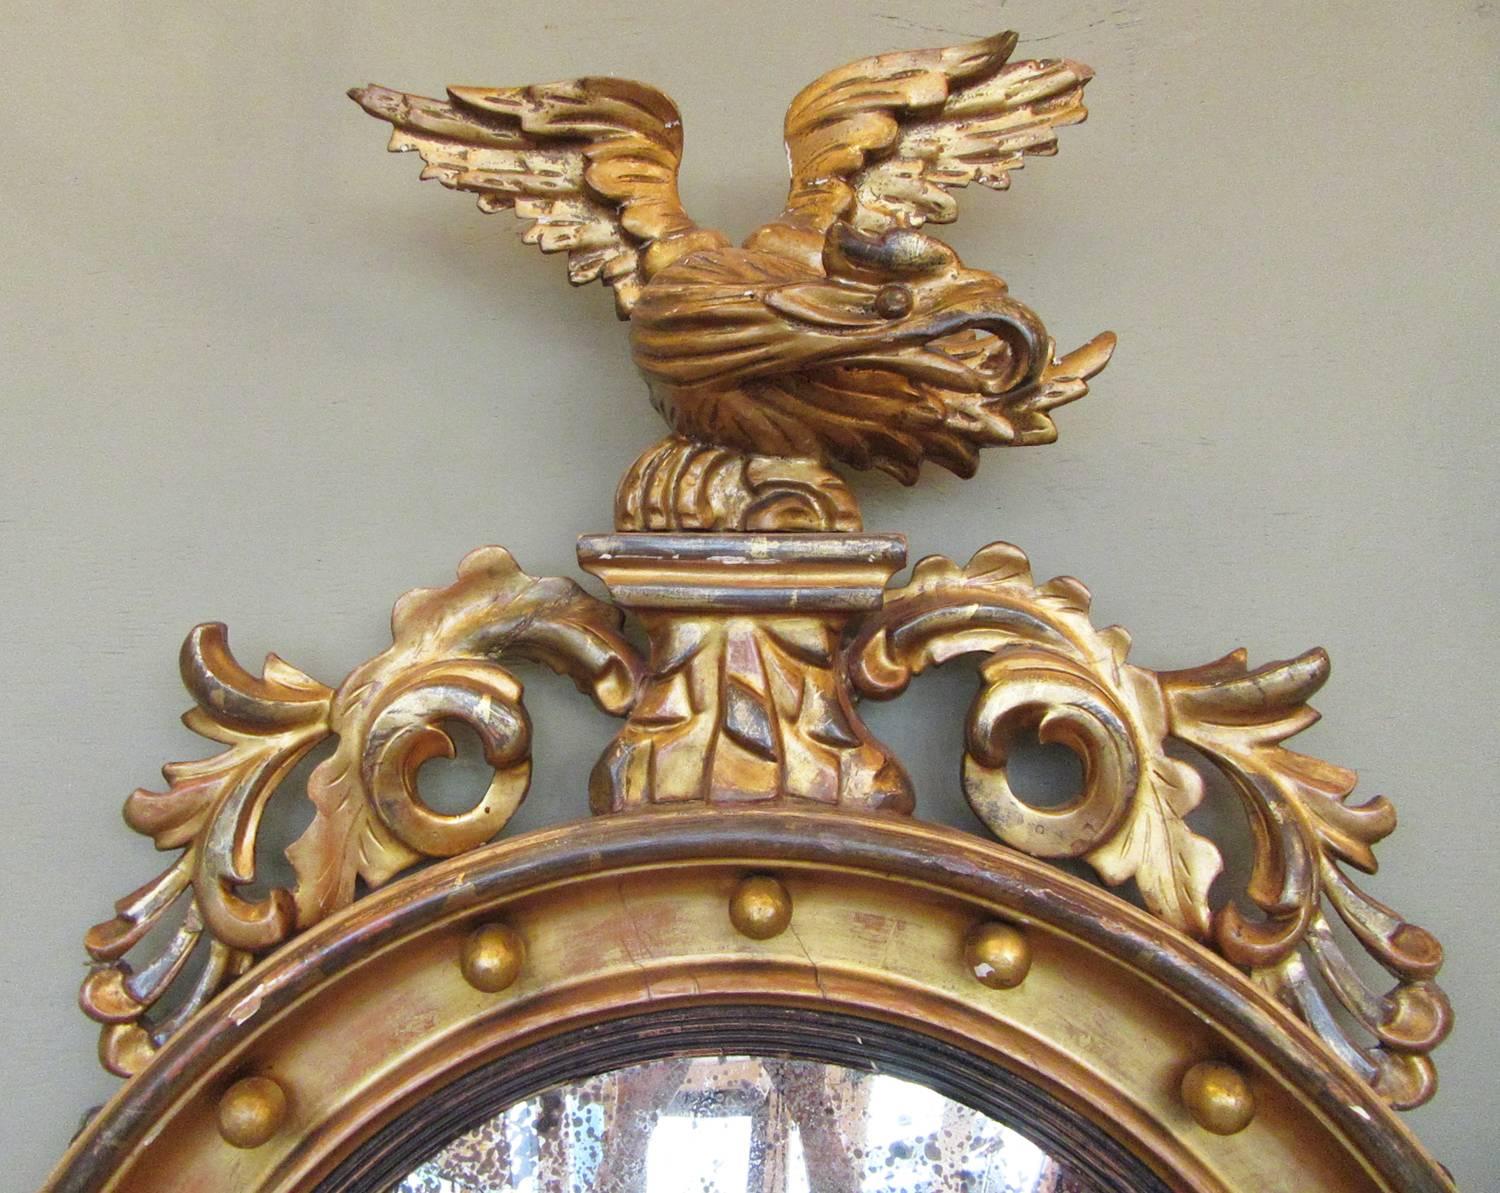 Carved 19th Century English Regency Giltwood Convex Mirror with Eagle and Acanthus